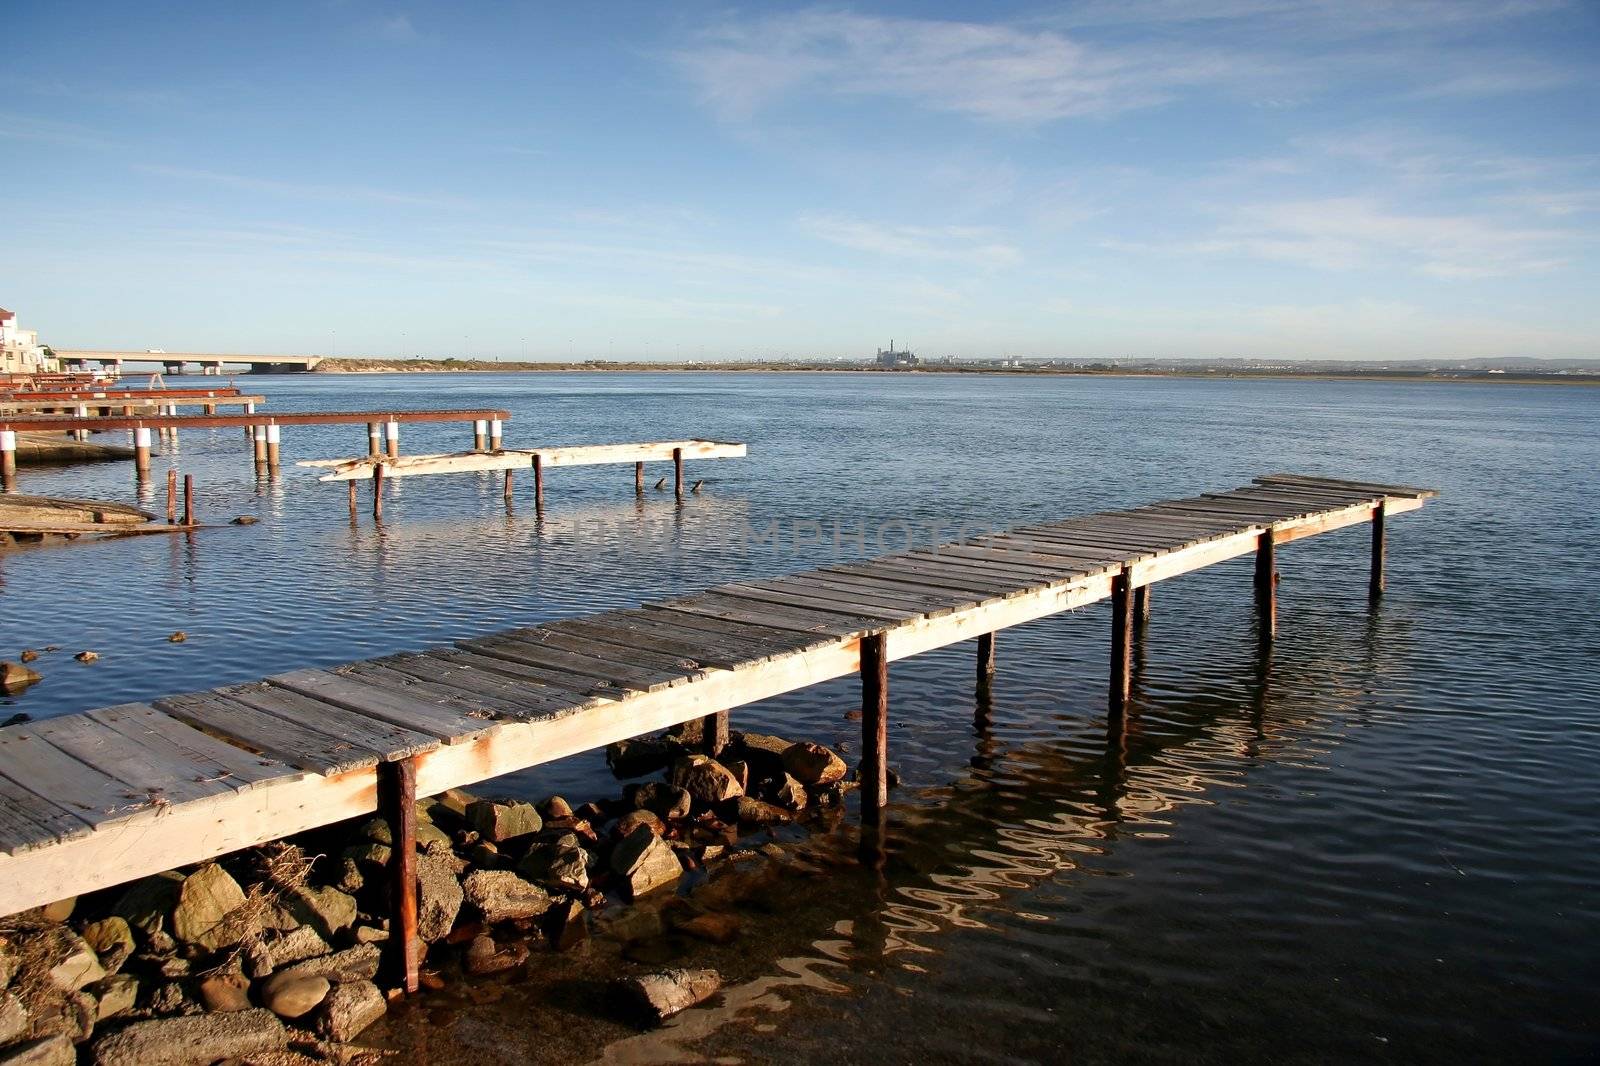 Jetty at a River by fouroaks